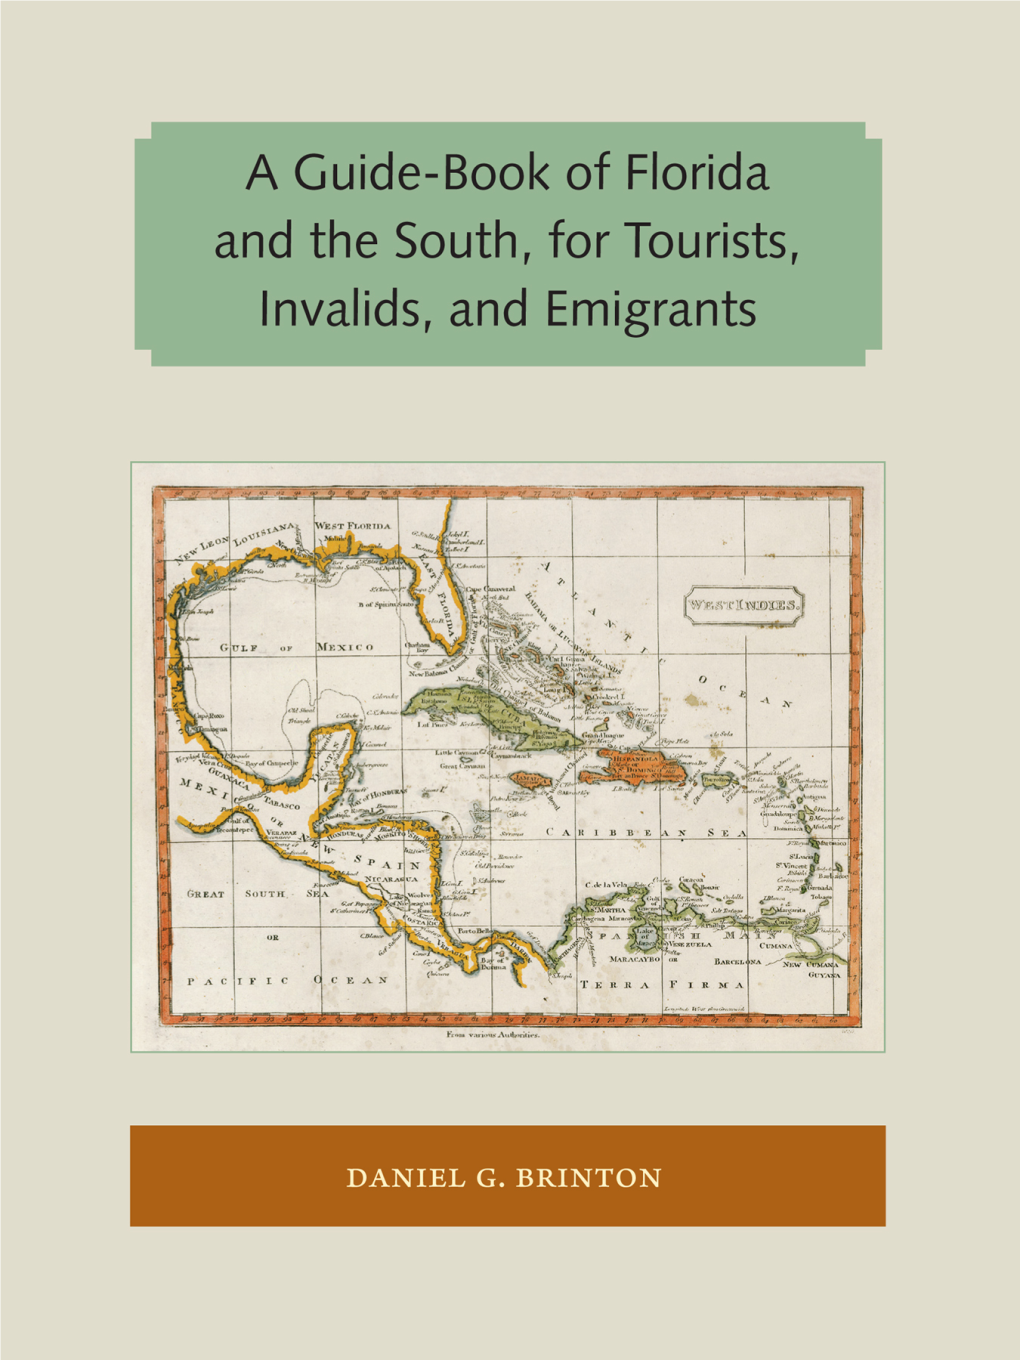 A Guide-Book of Florida and the South, for Tourists, Invalids, and Emigrants